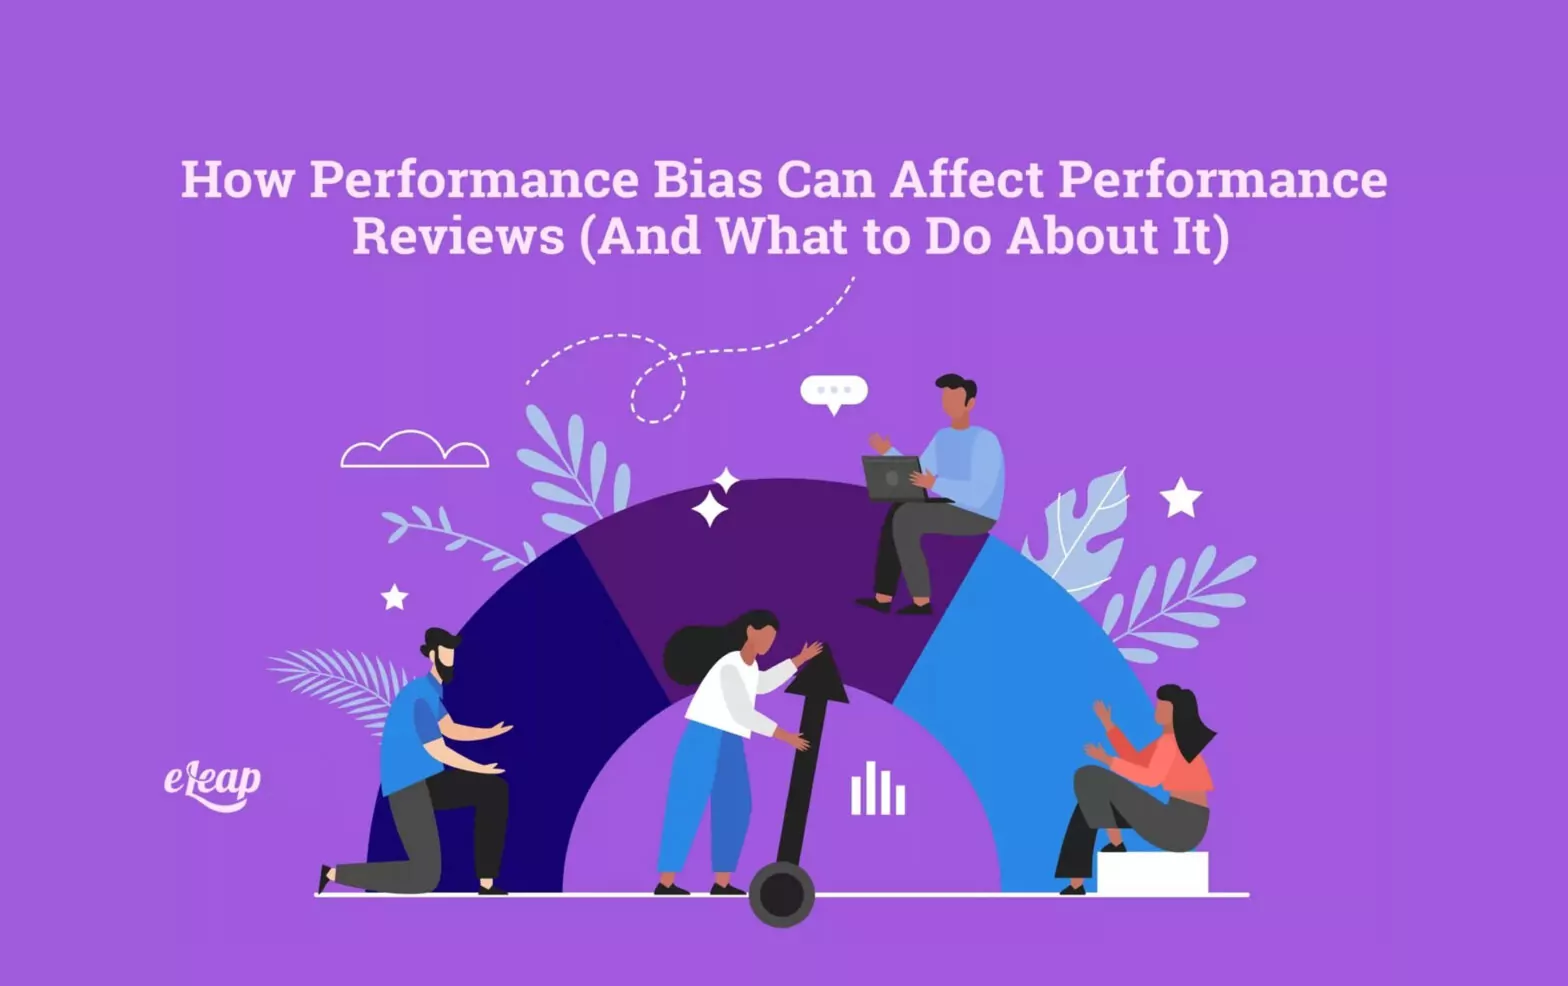 How Performance Bias Can Affect Performance Reviews (And What to Do About It)